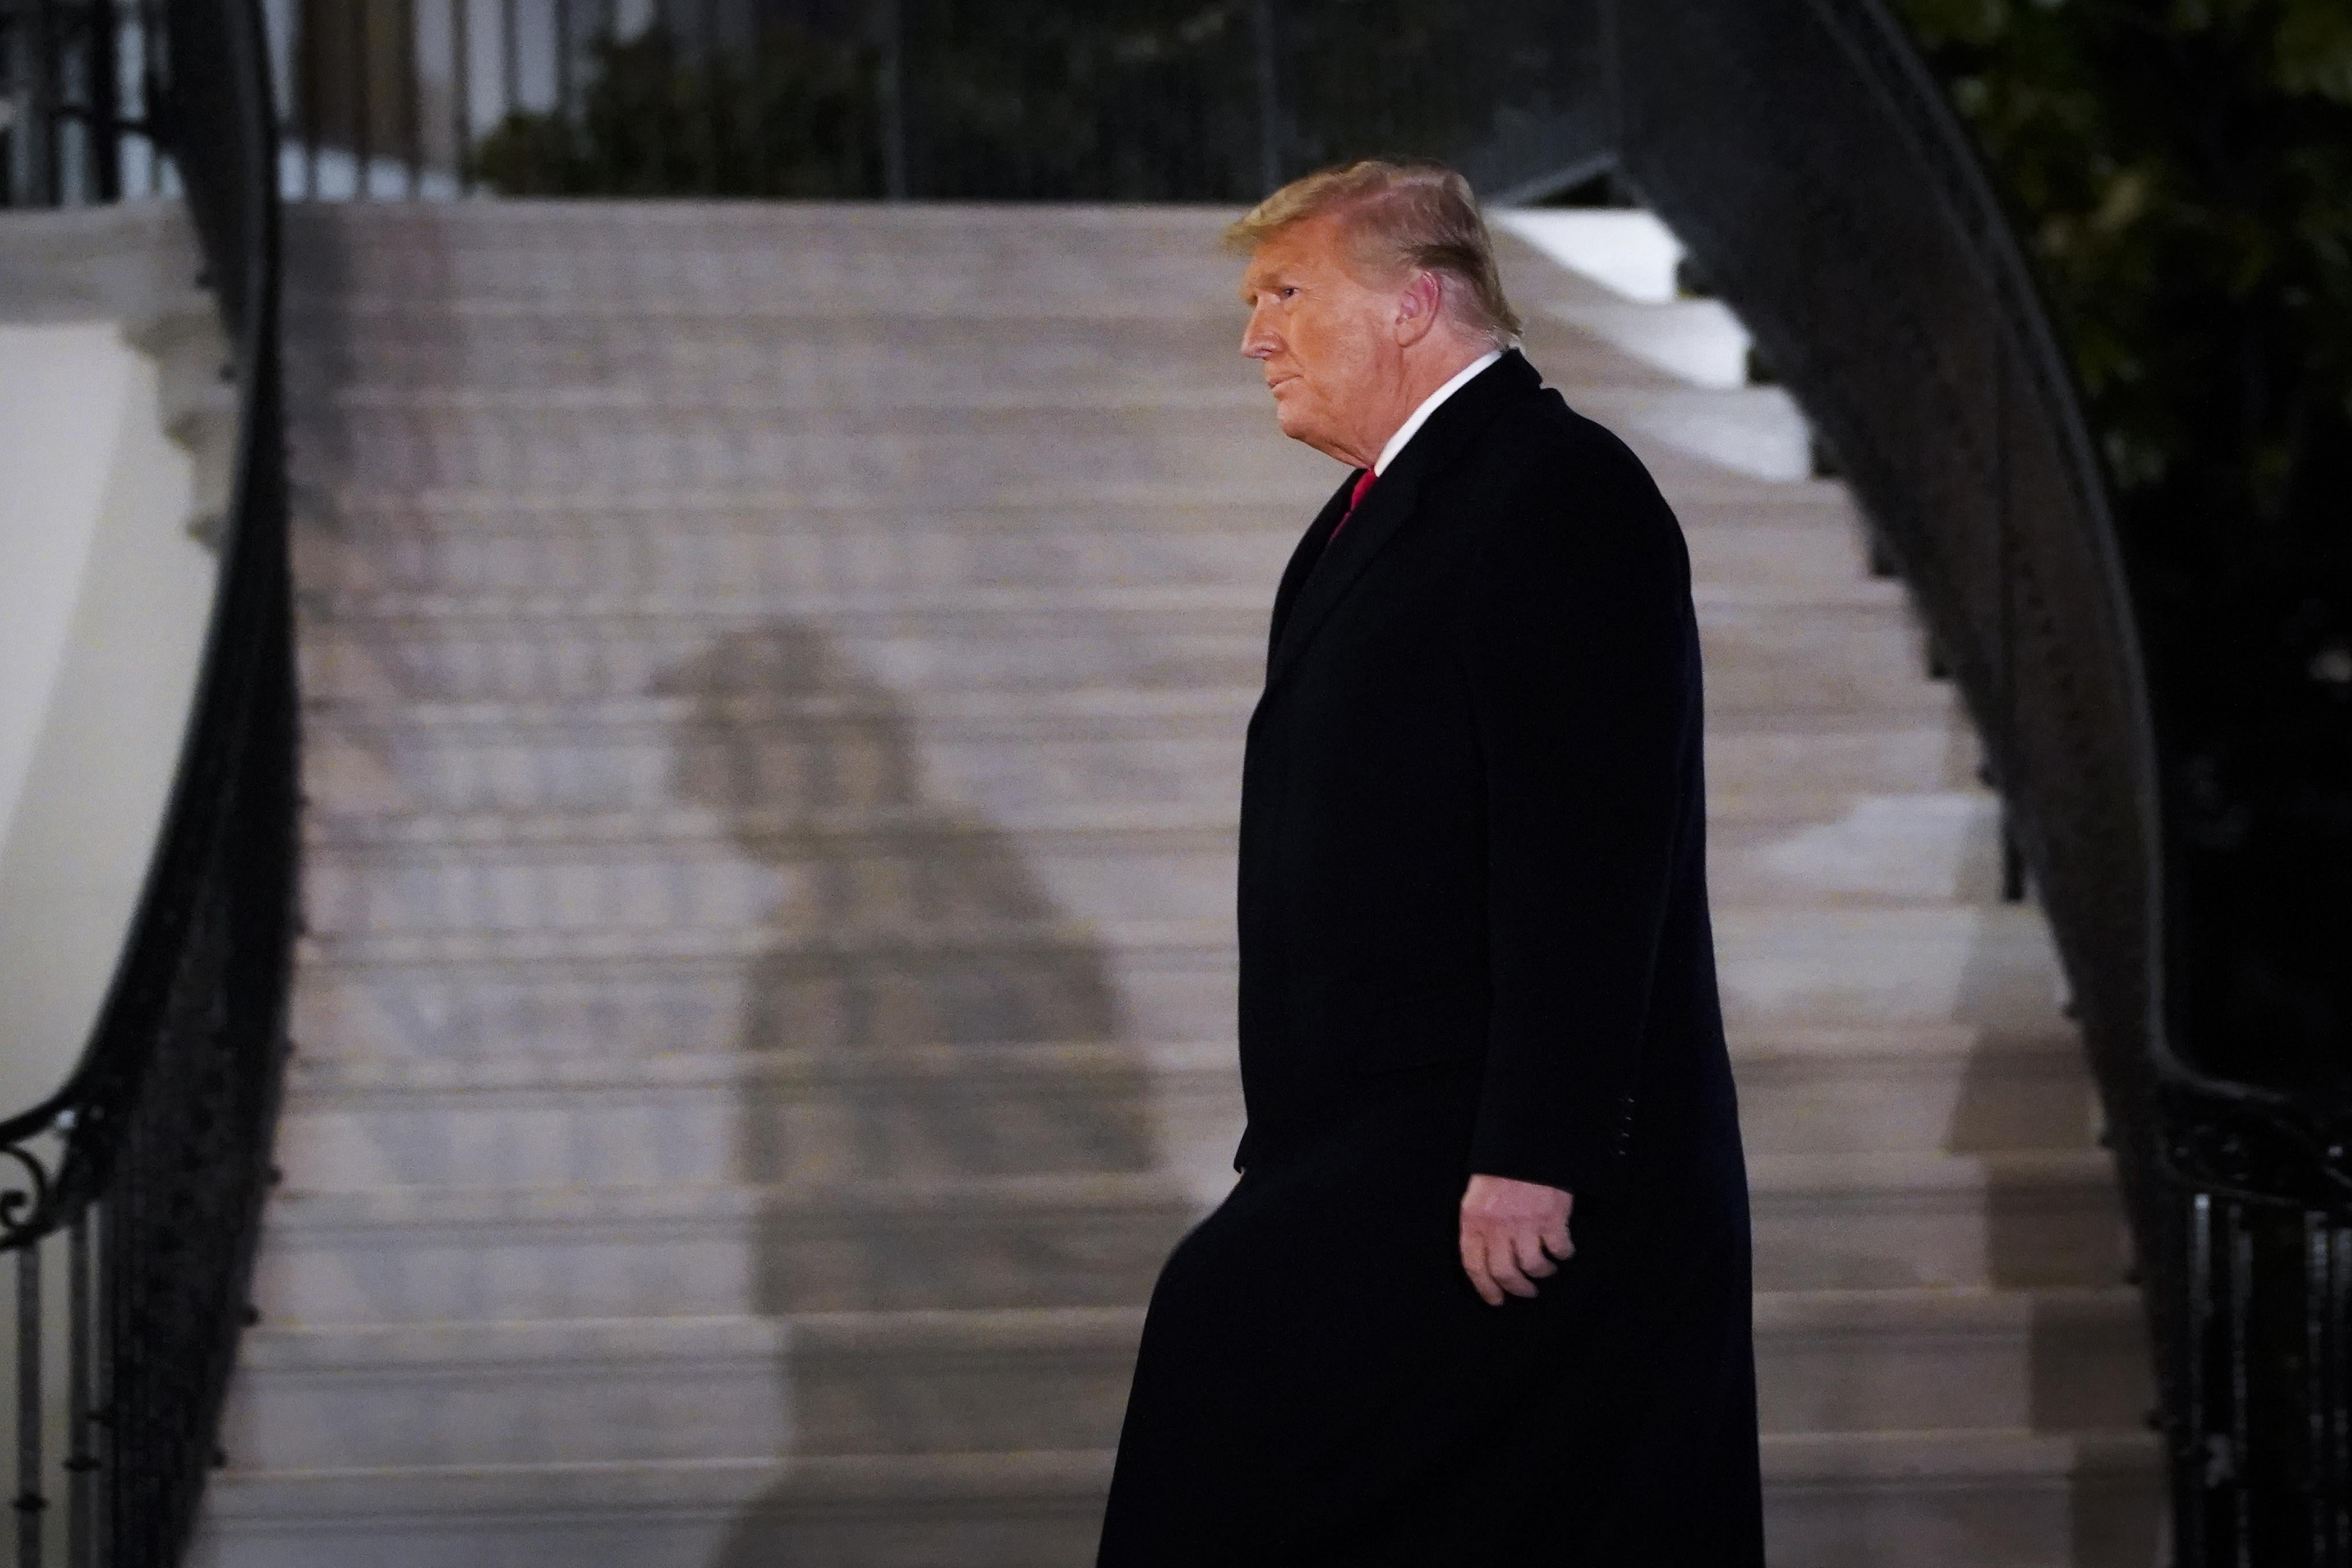 Donald Trump walks past a staircase outside at night